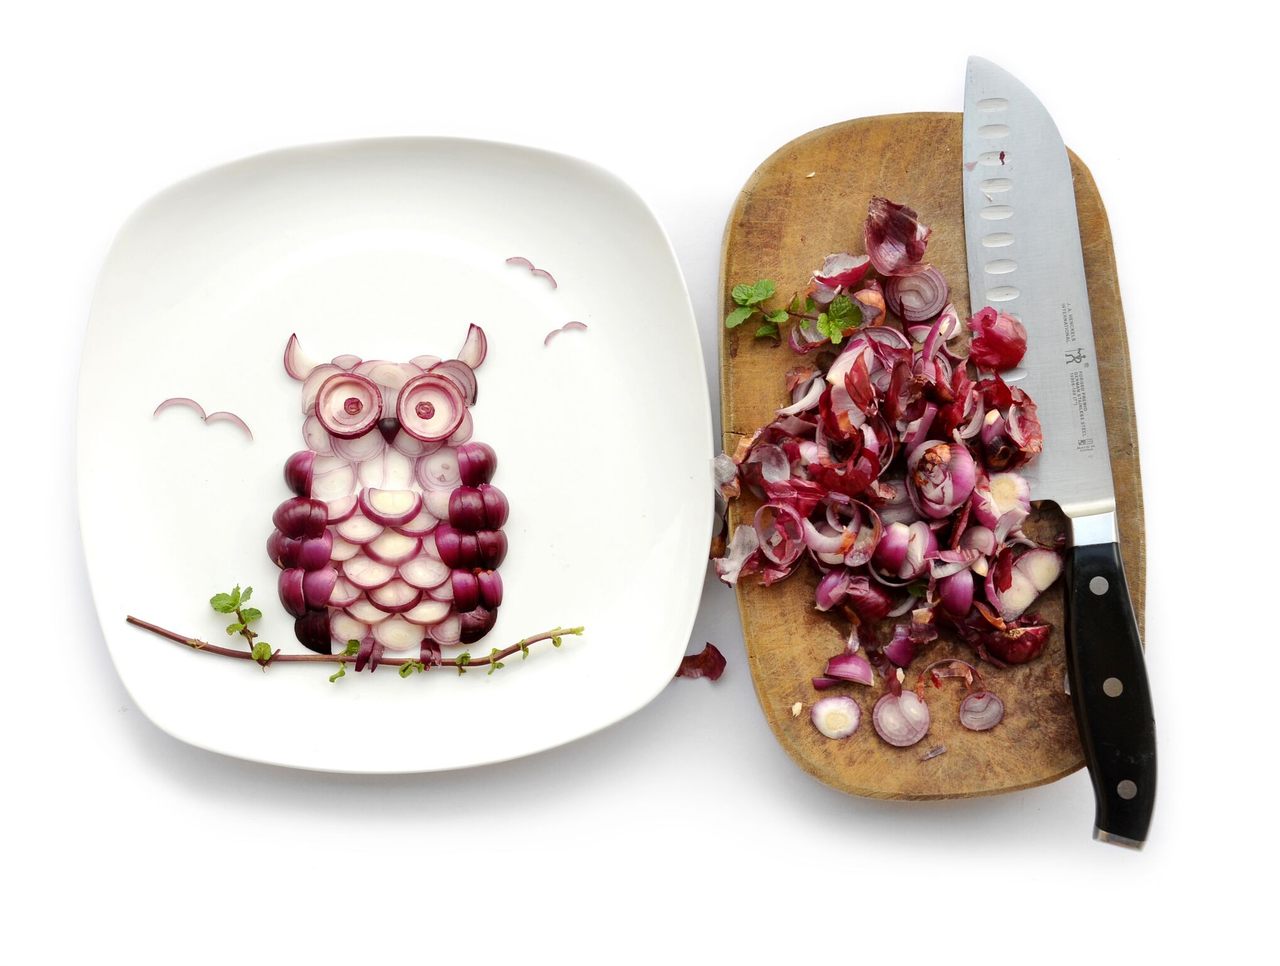 Creating this "Owlnion" from shallots and mint leaves brought the artist to tears—the result of chopping raw onion.